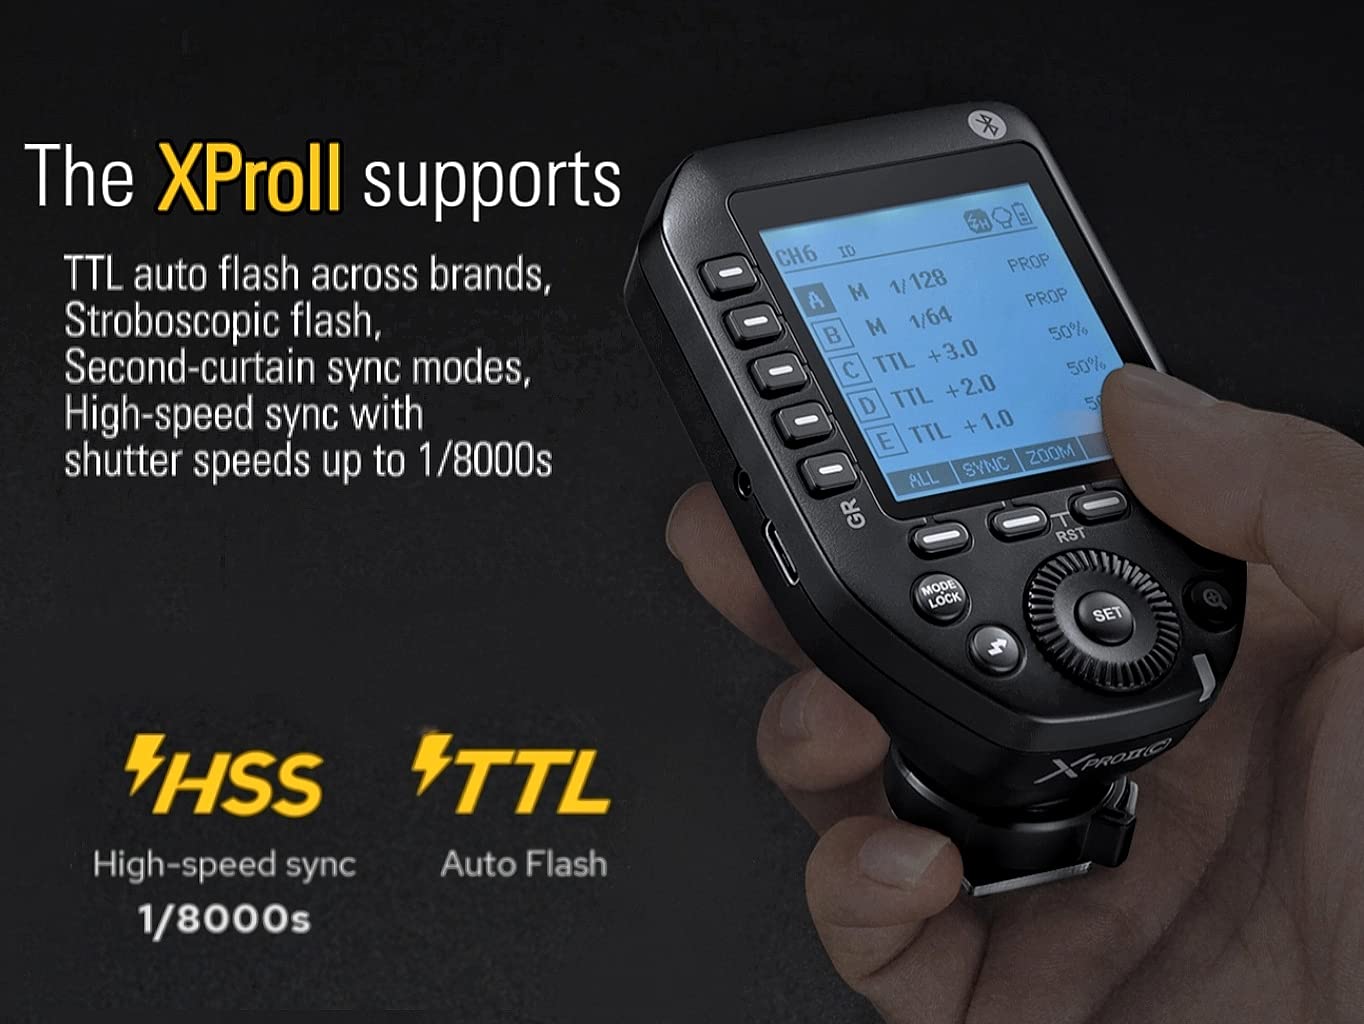 Godox XProII-S TTL Wireless Flash Trigger Compatible for Sony, 1/8000s HSS 2.4G Wireless Flash Transmitter, TTL-Convert-Manual, Extra Large LCD Screen, Bluetooth Connection, New Hotshoe Locking